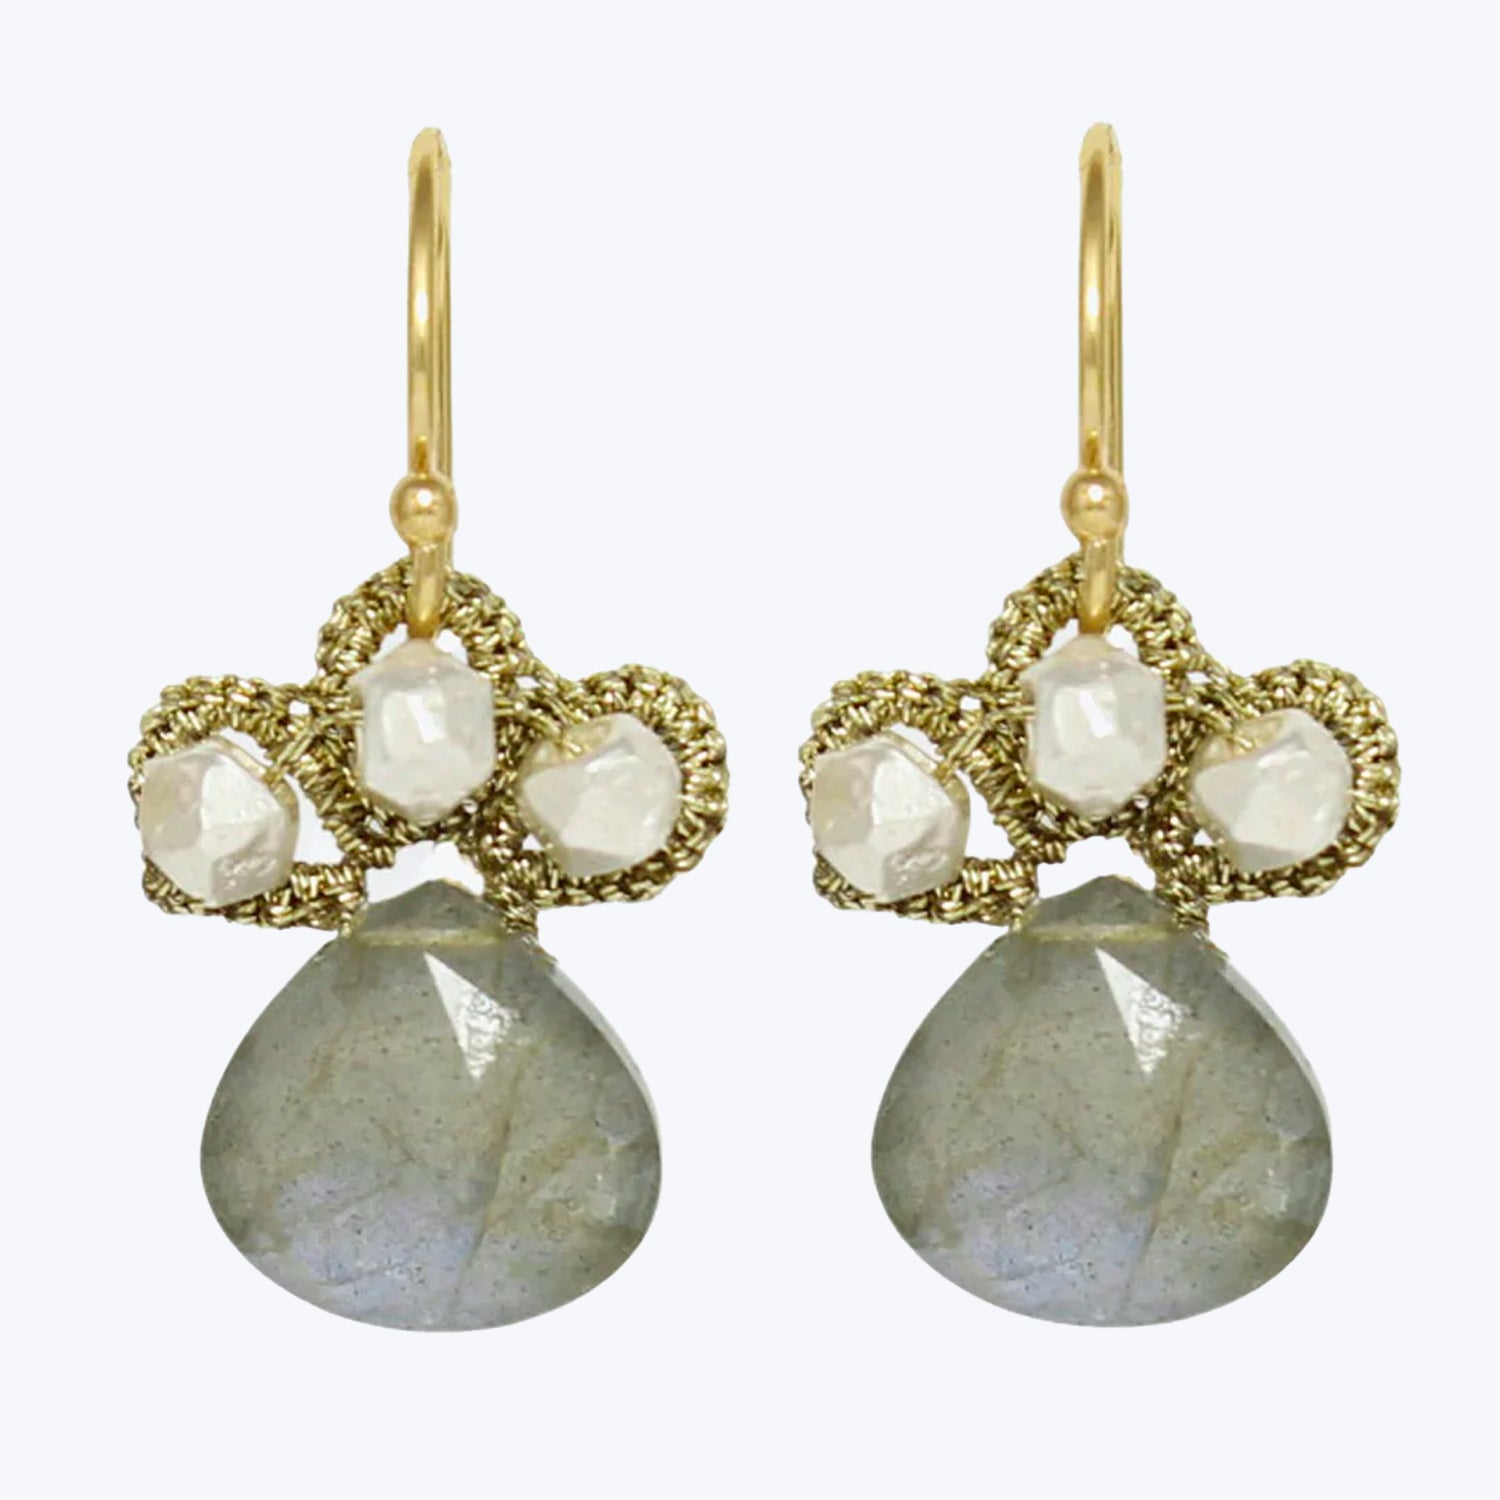 Elegant gold-toned earrings with clover-like stones, perfect for dressy occasions.